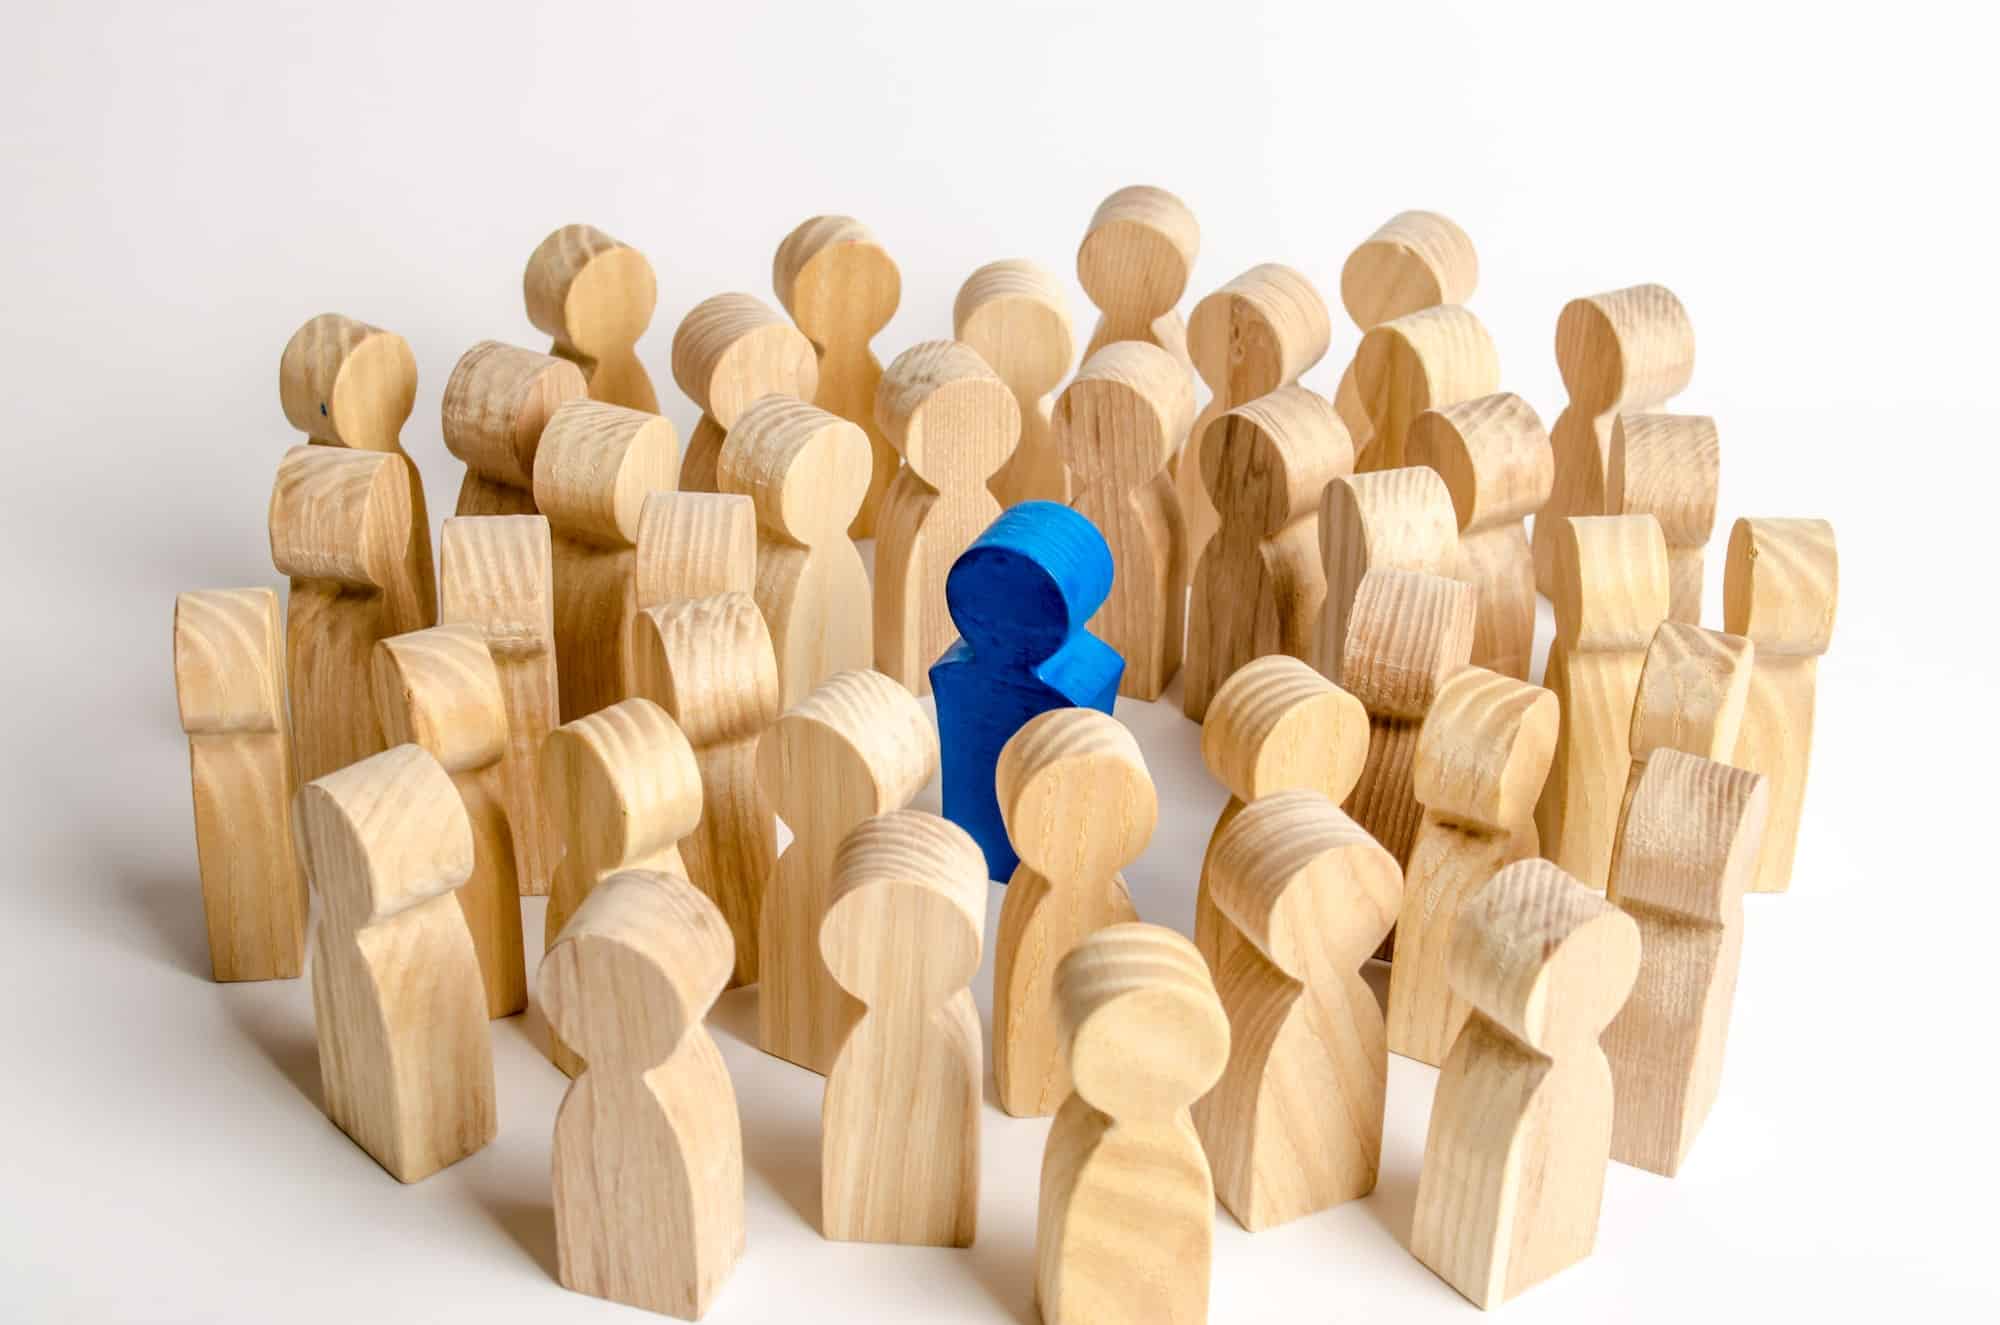 Wooden people crowd